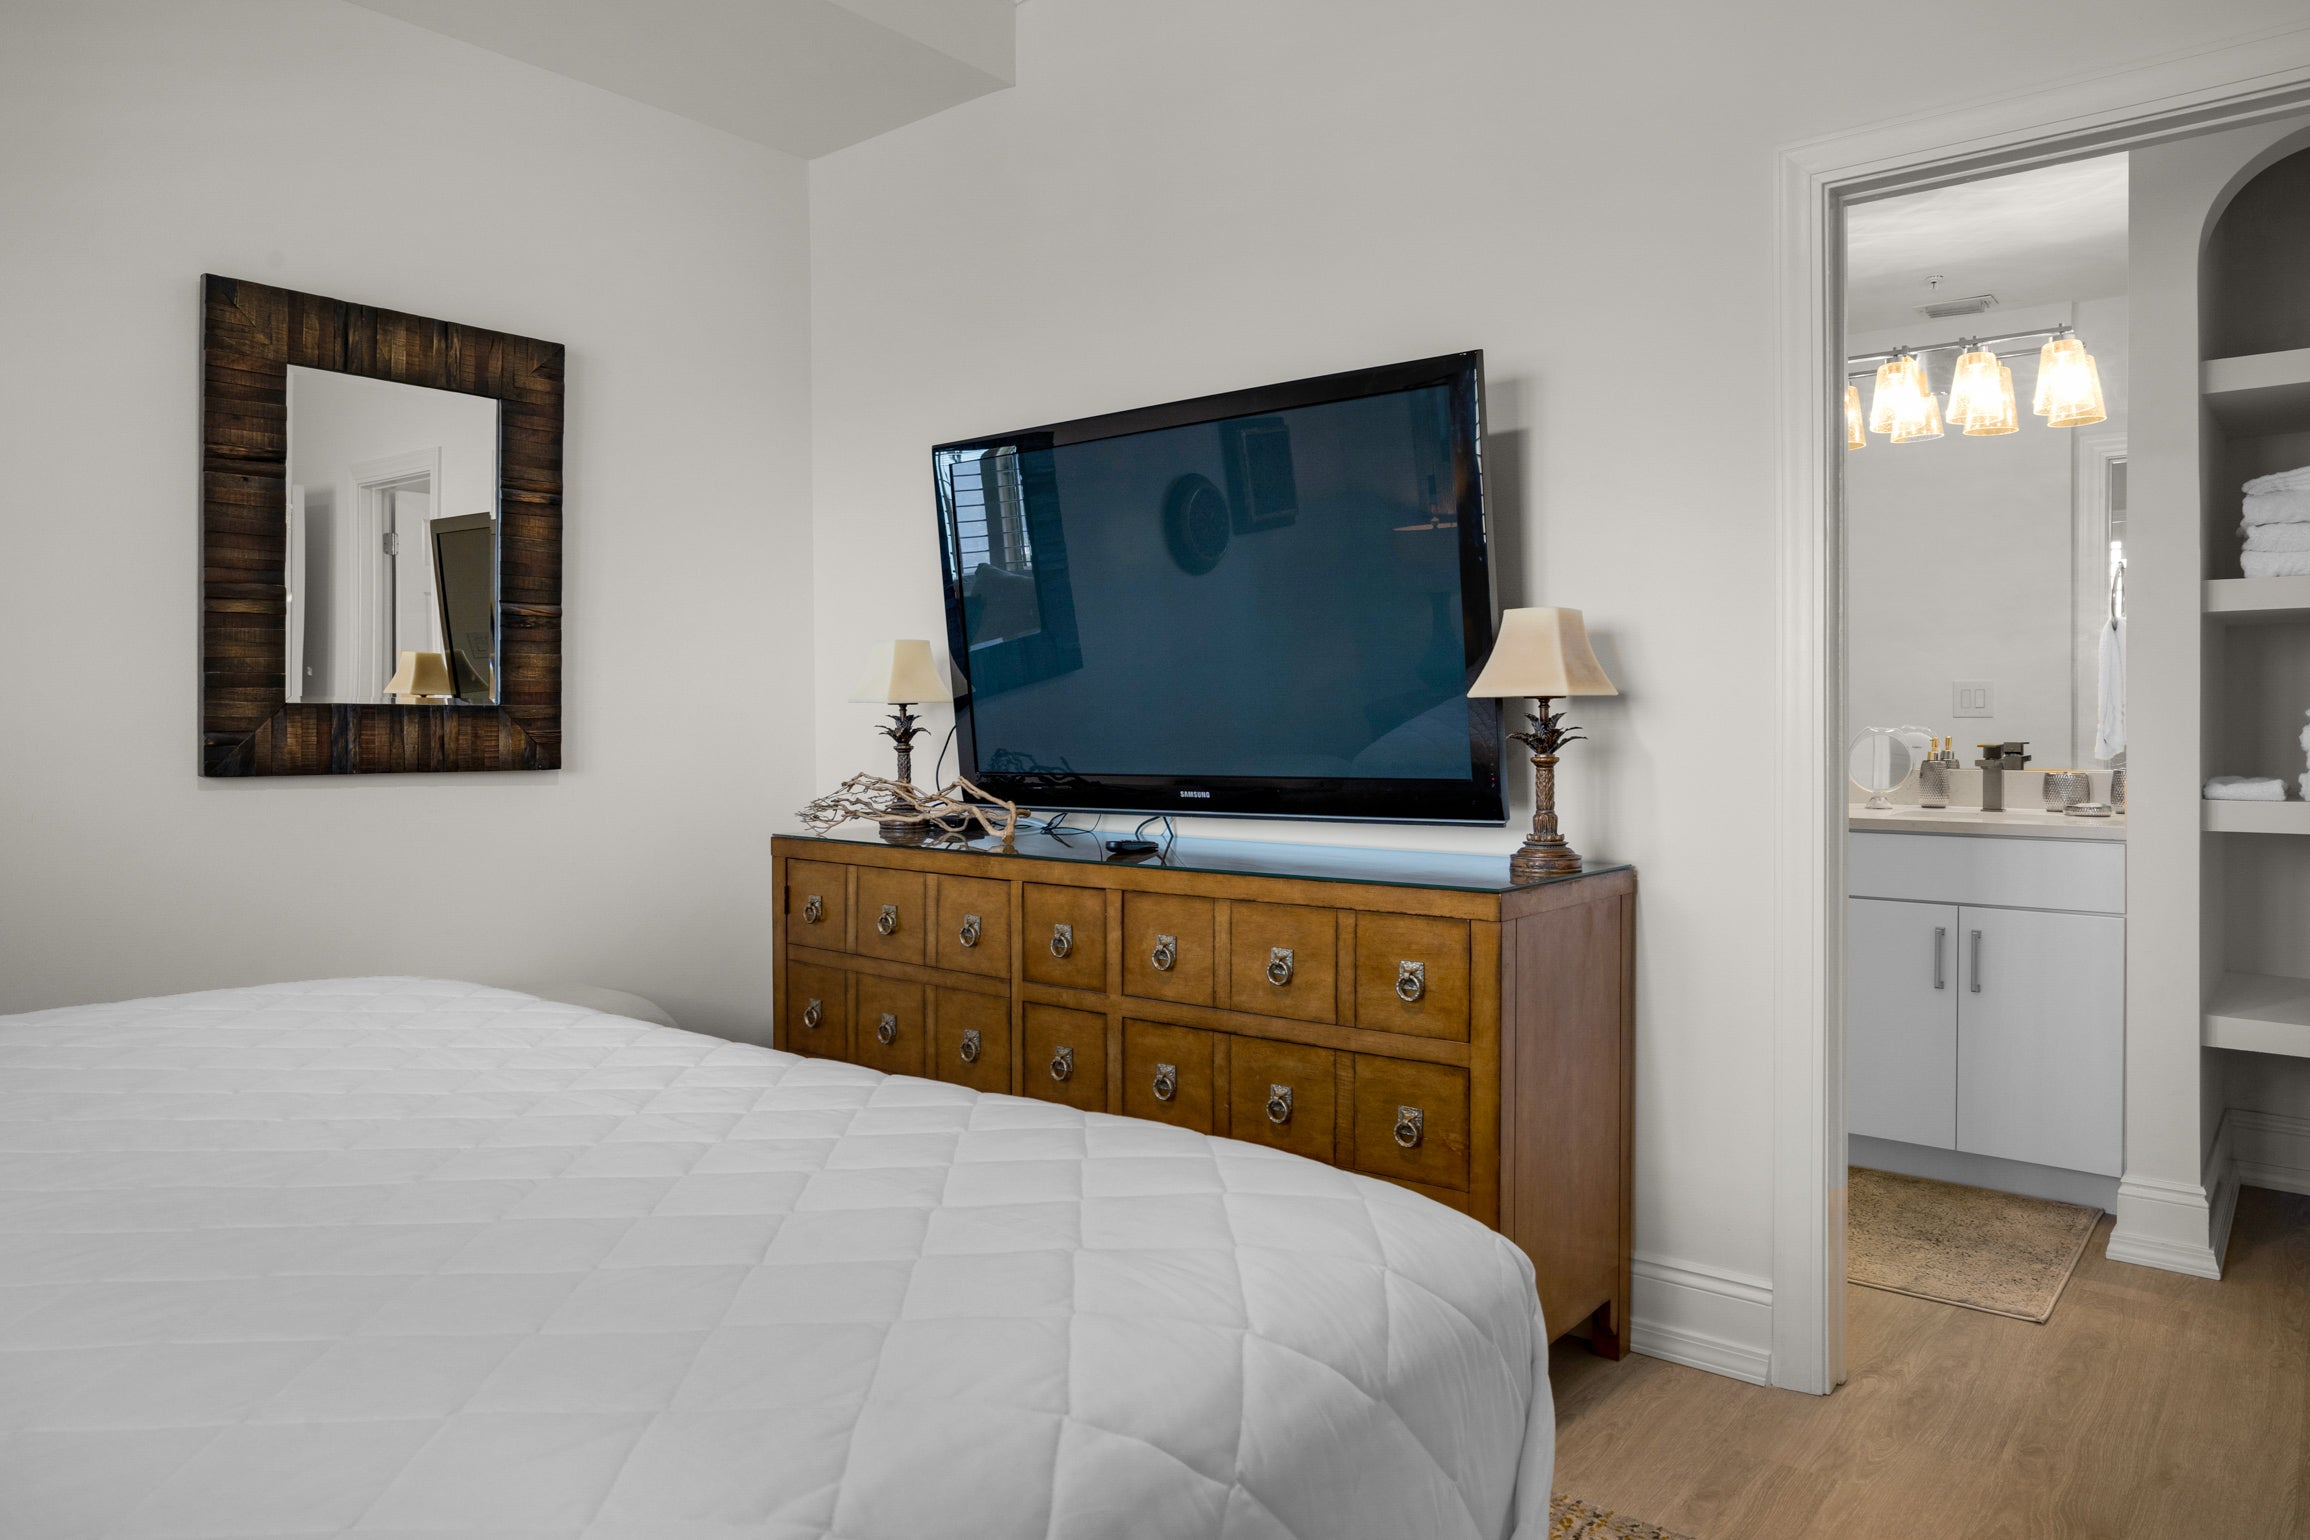 Spacious Guest Room with Large Flatscreen